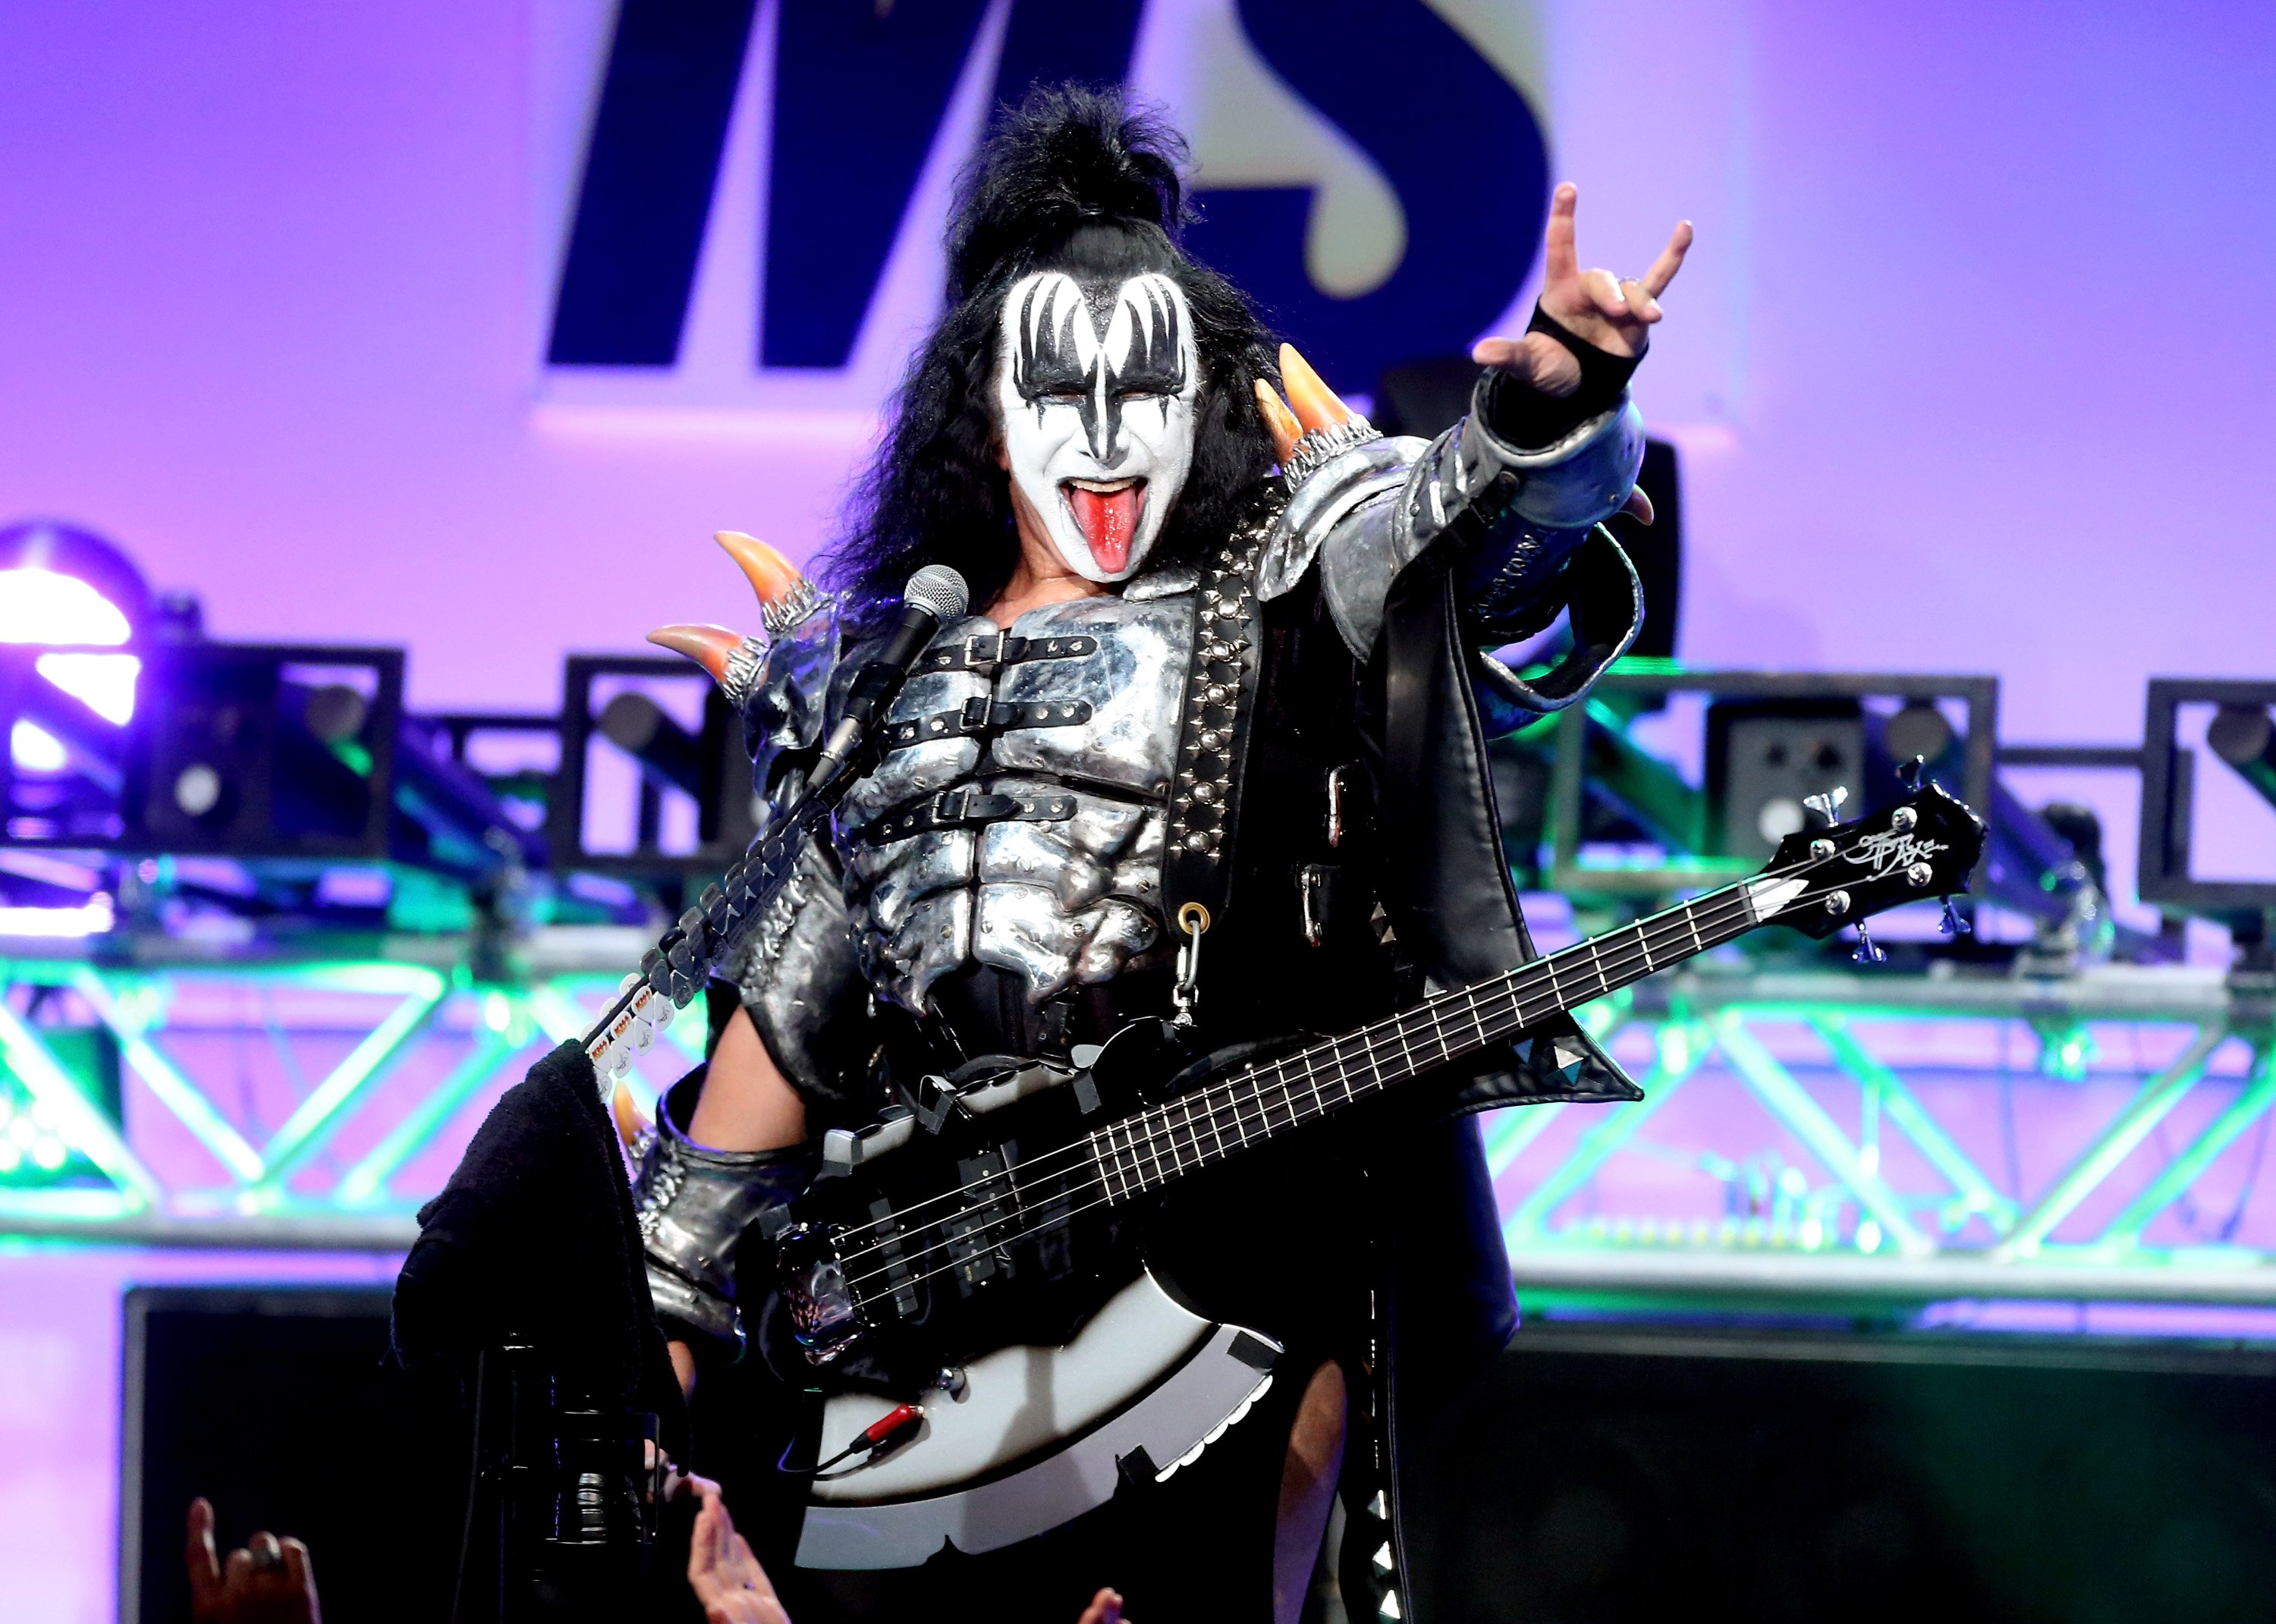 Gene Simmons of Kiss with a guitar